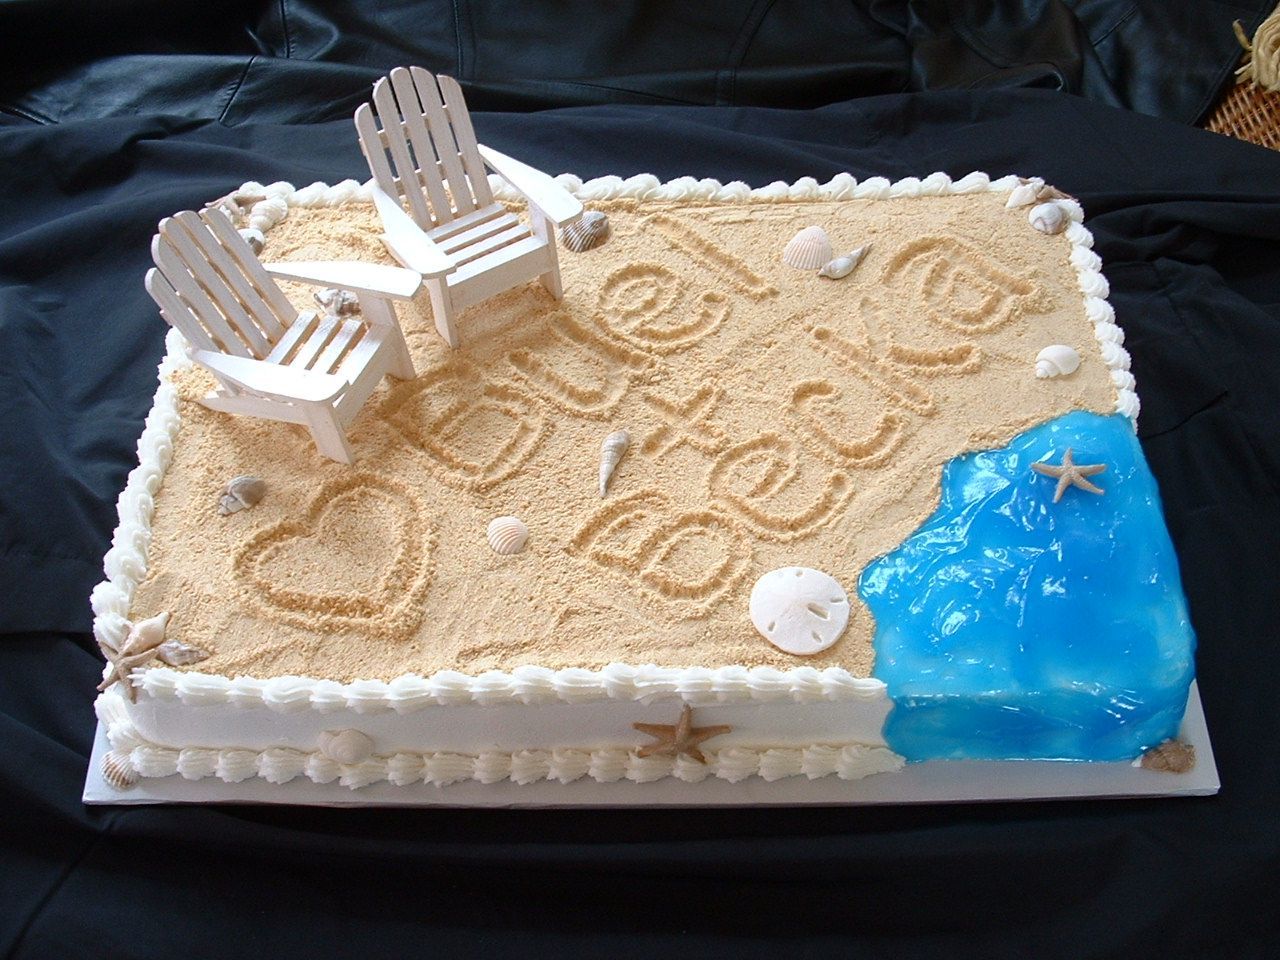 Beach Theme Bridal Shower Cake – Made this cake for a client who is having a bri